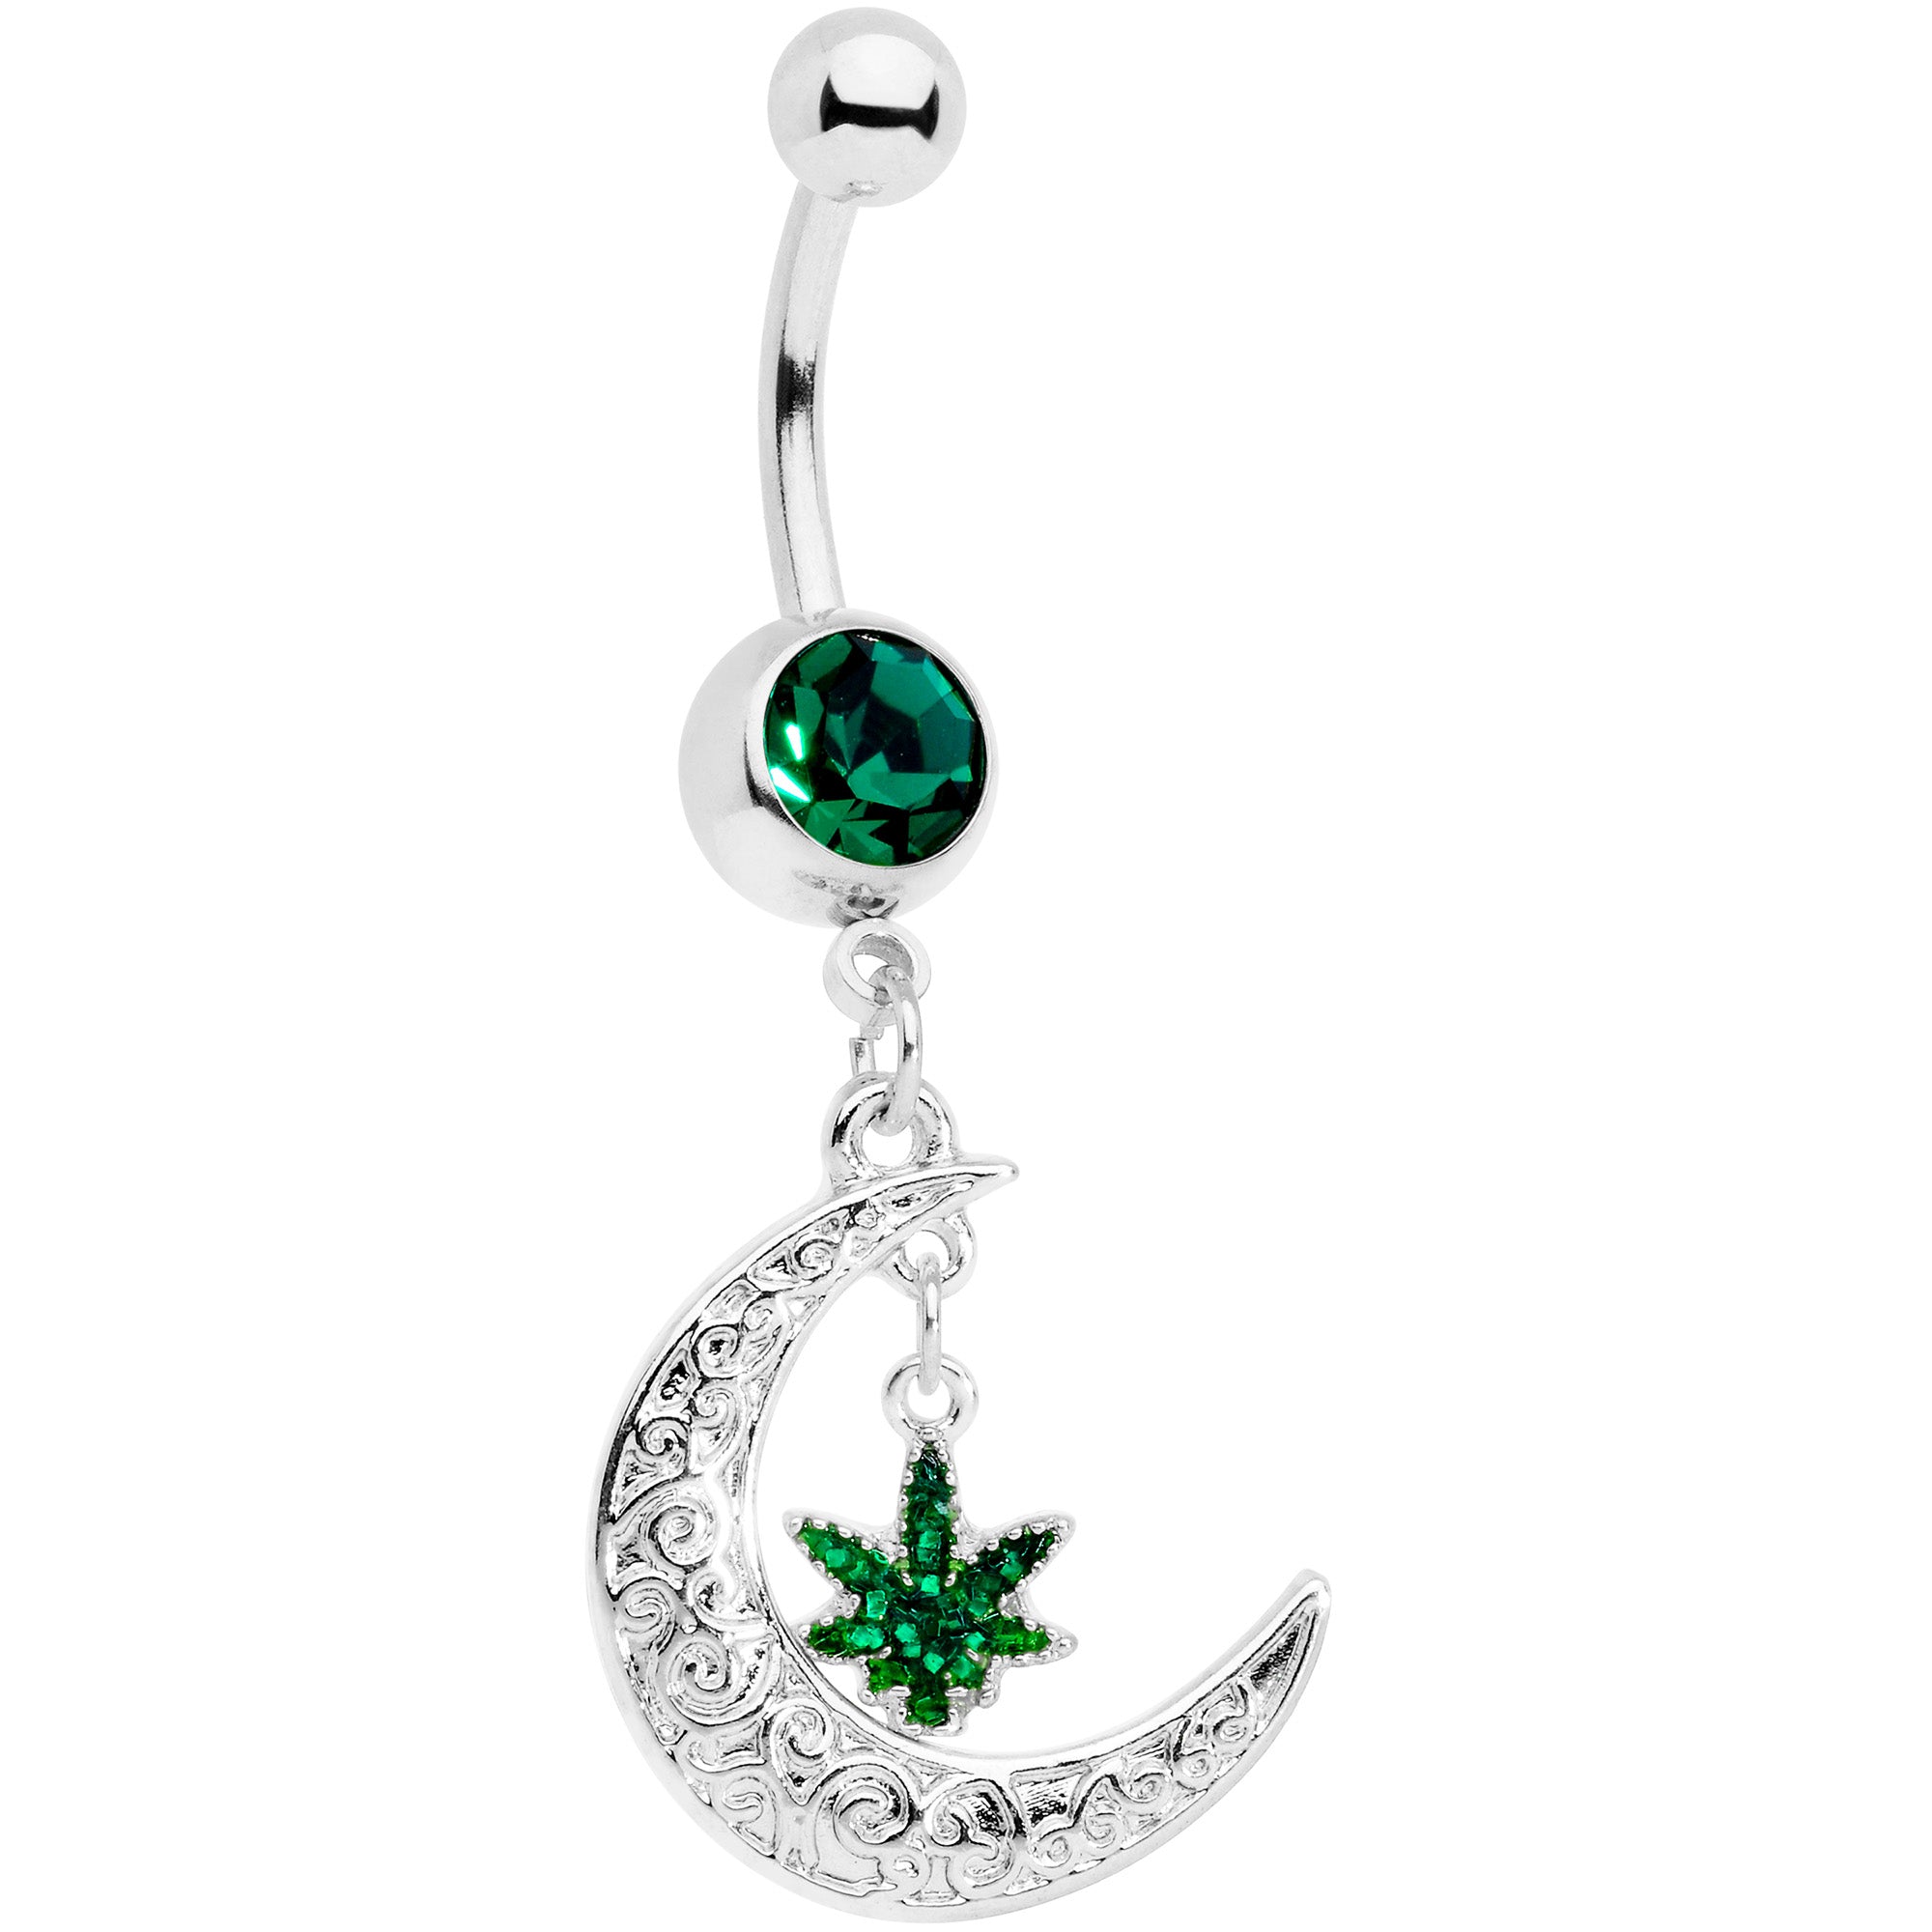 Handmade Belly Button Ring With a Leaf Charm and Two Light 